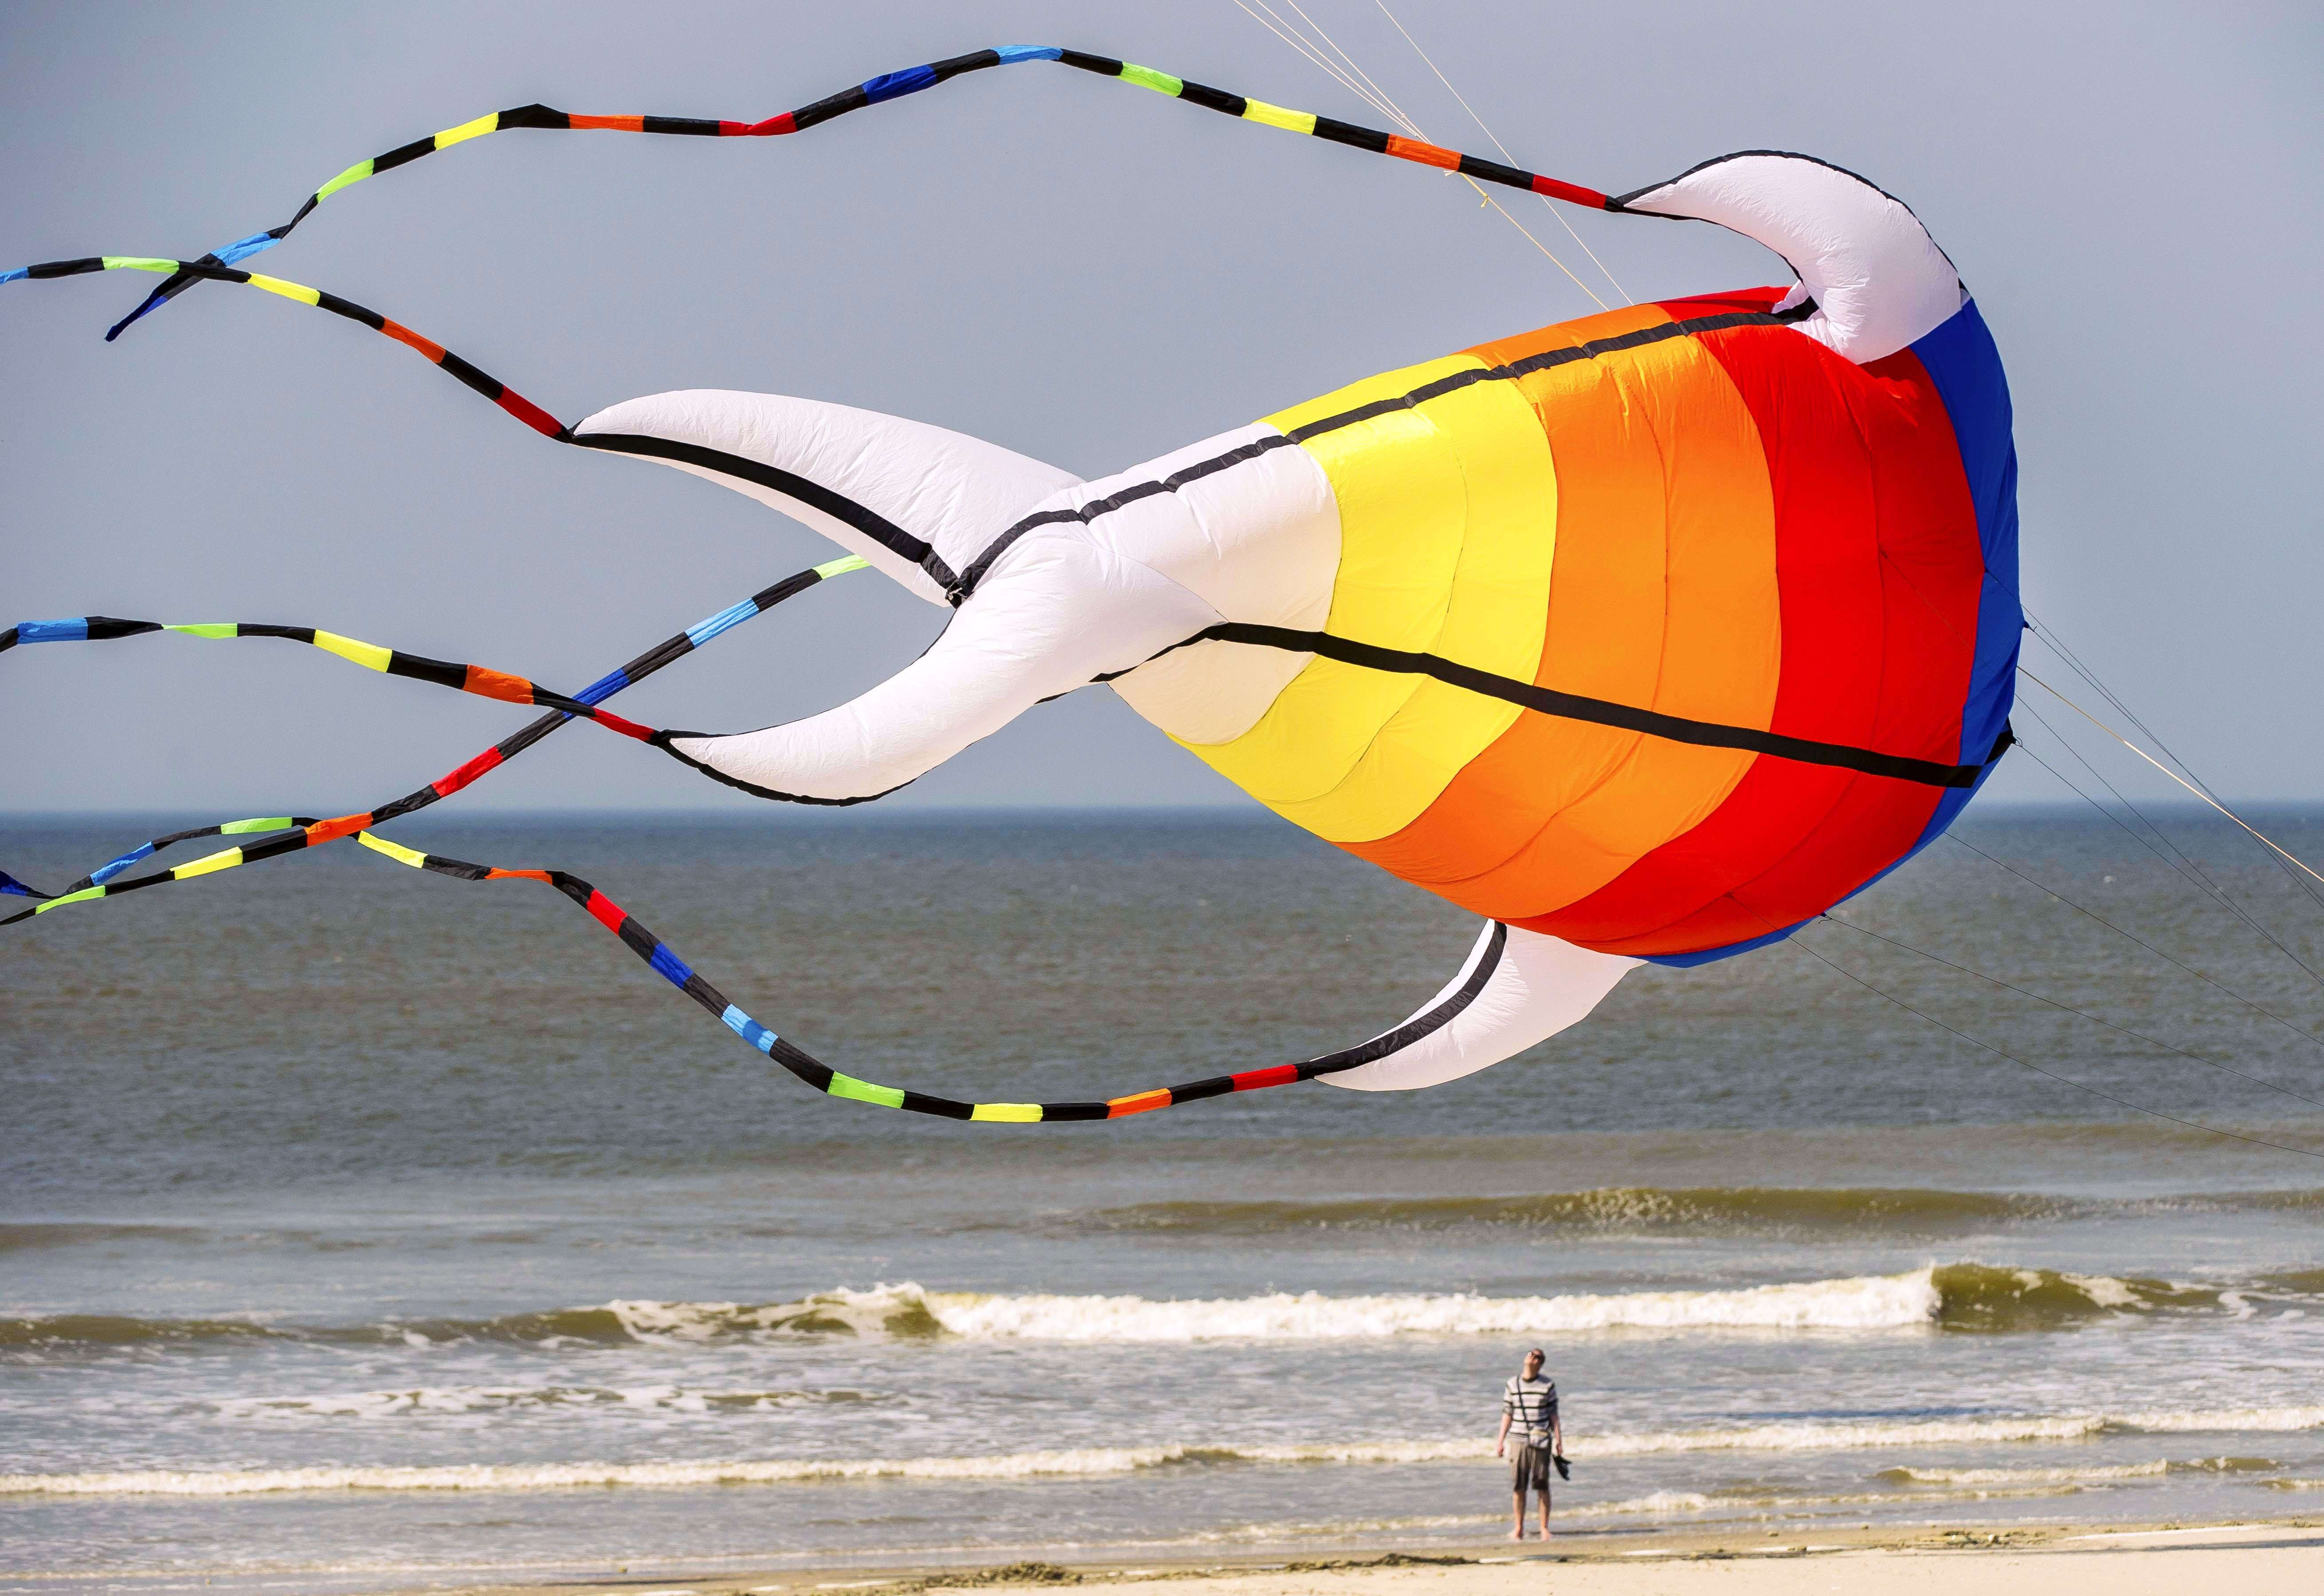 A man looks up at a giant kite flying above the beach in Berck, northern France, during the 29th 'Rencontres Internationales de Cerfs Volants' (International Kite Meeting) which runs from April 18 to 26. (AFP PHOTO/PHILIPPE HUGUEN)